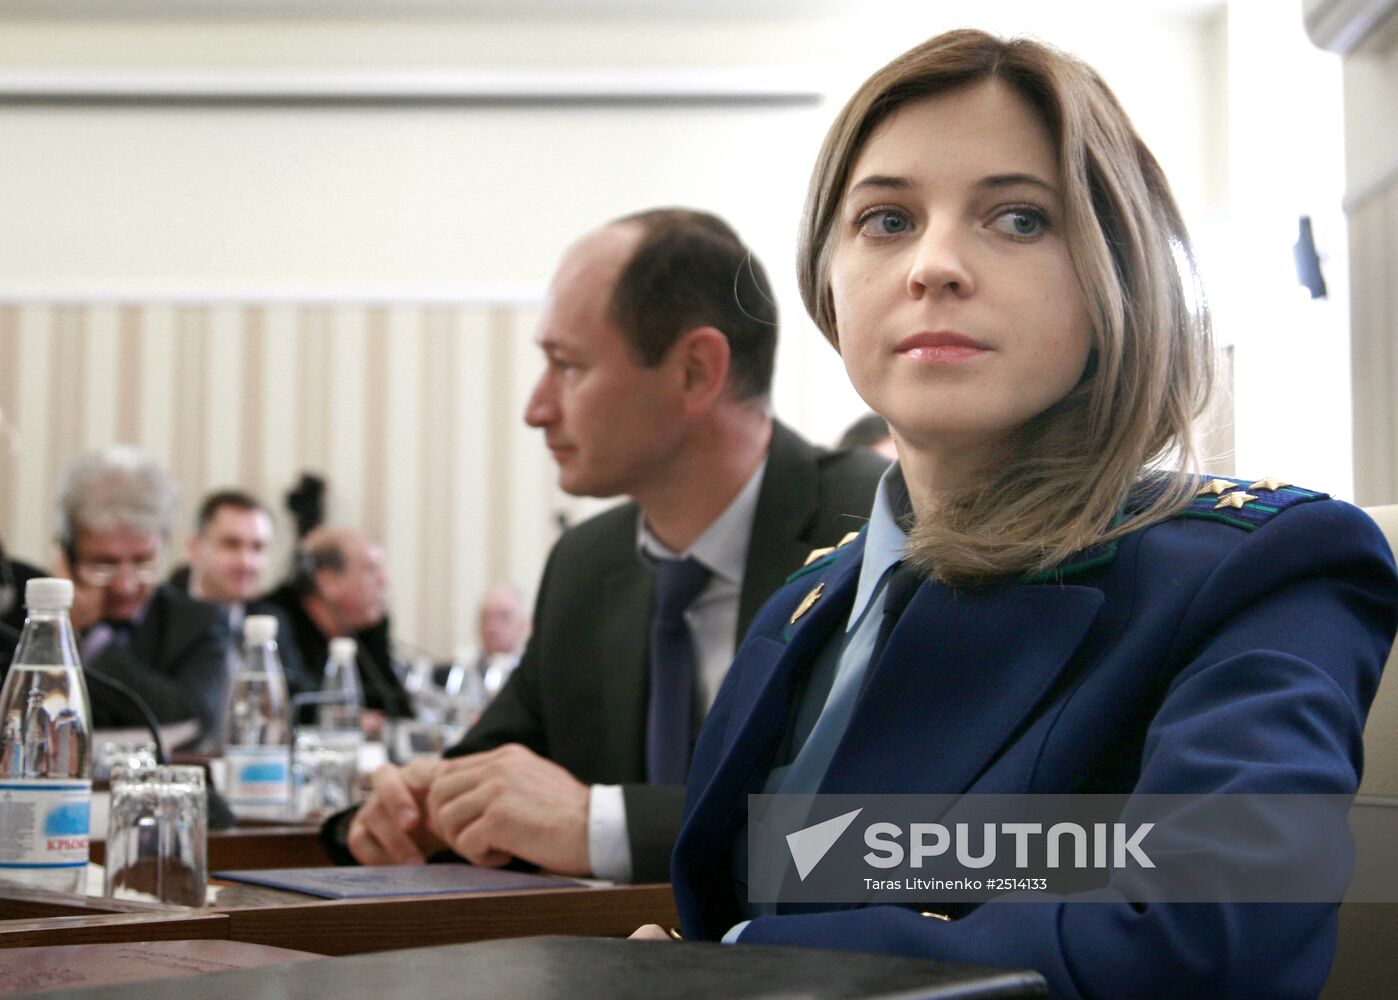 Meeting of the Crimea Council of Ministers in Simferopol